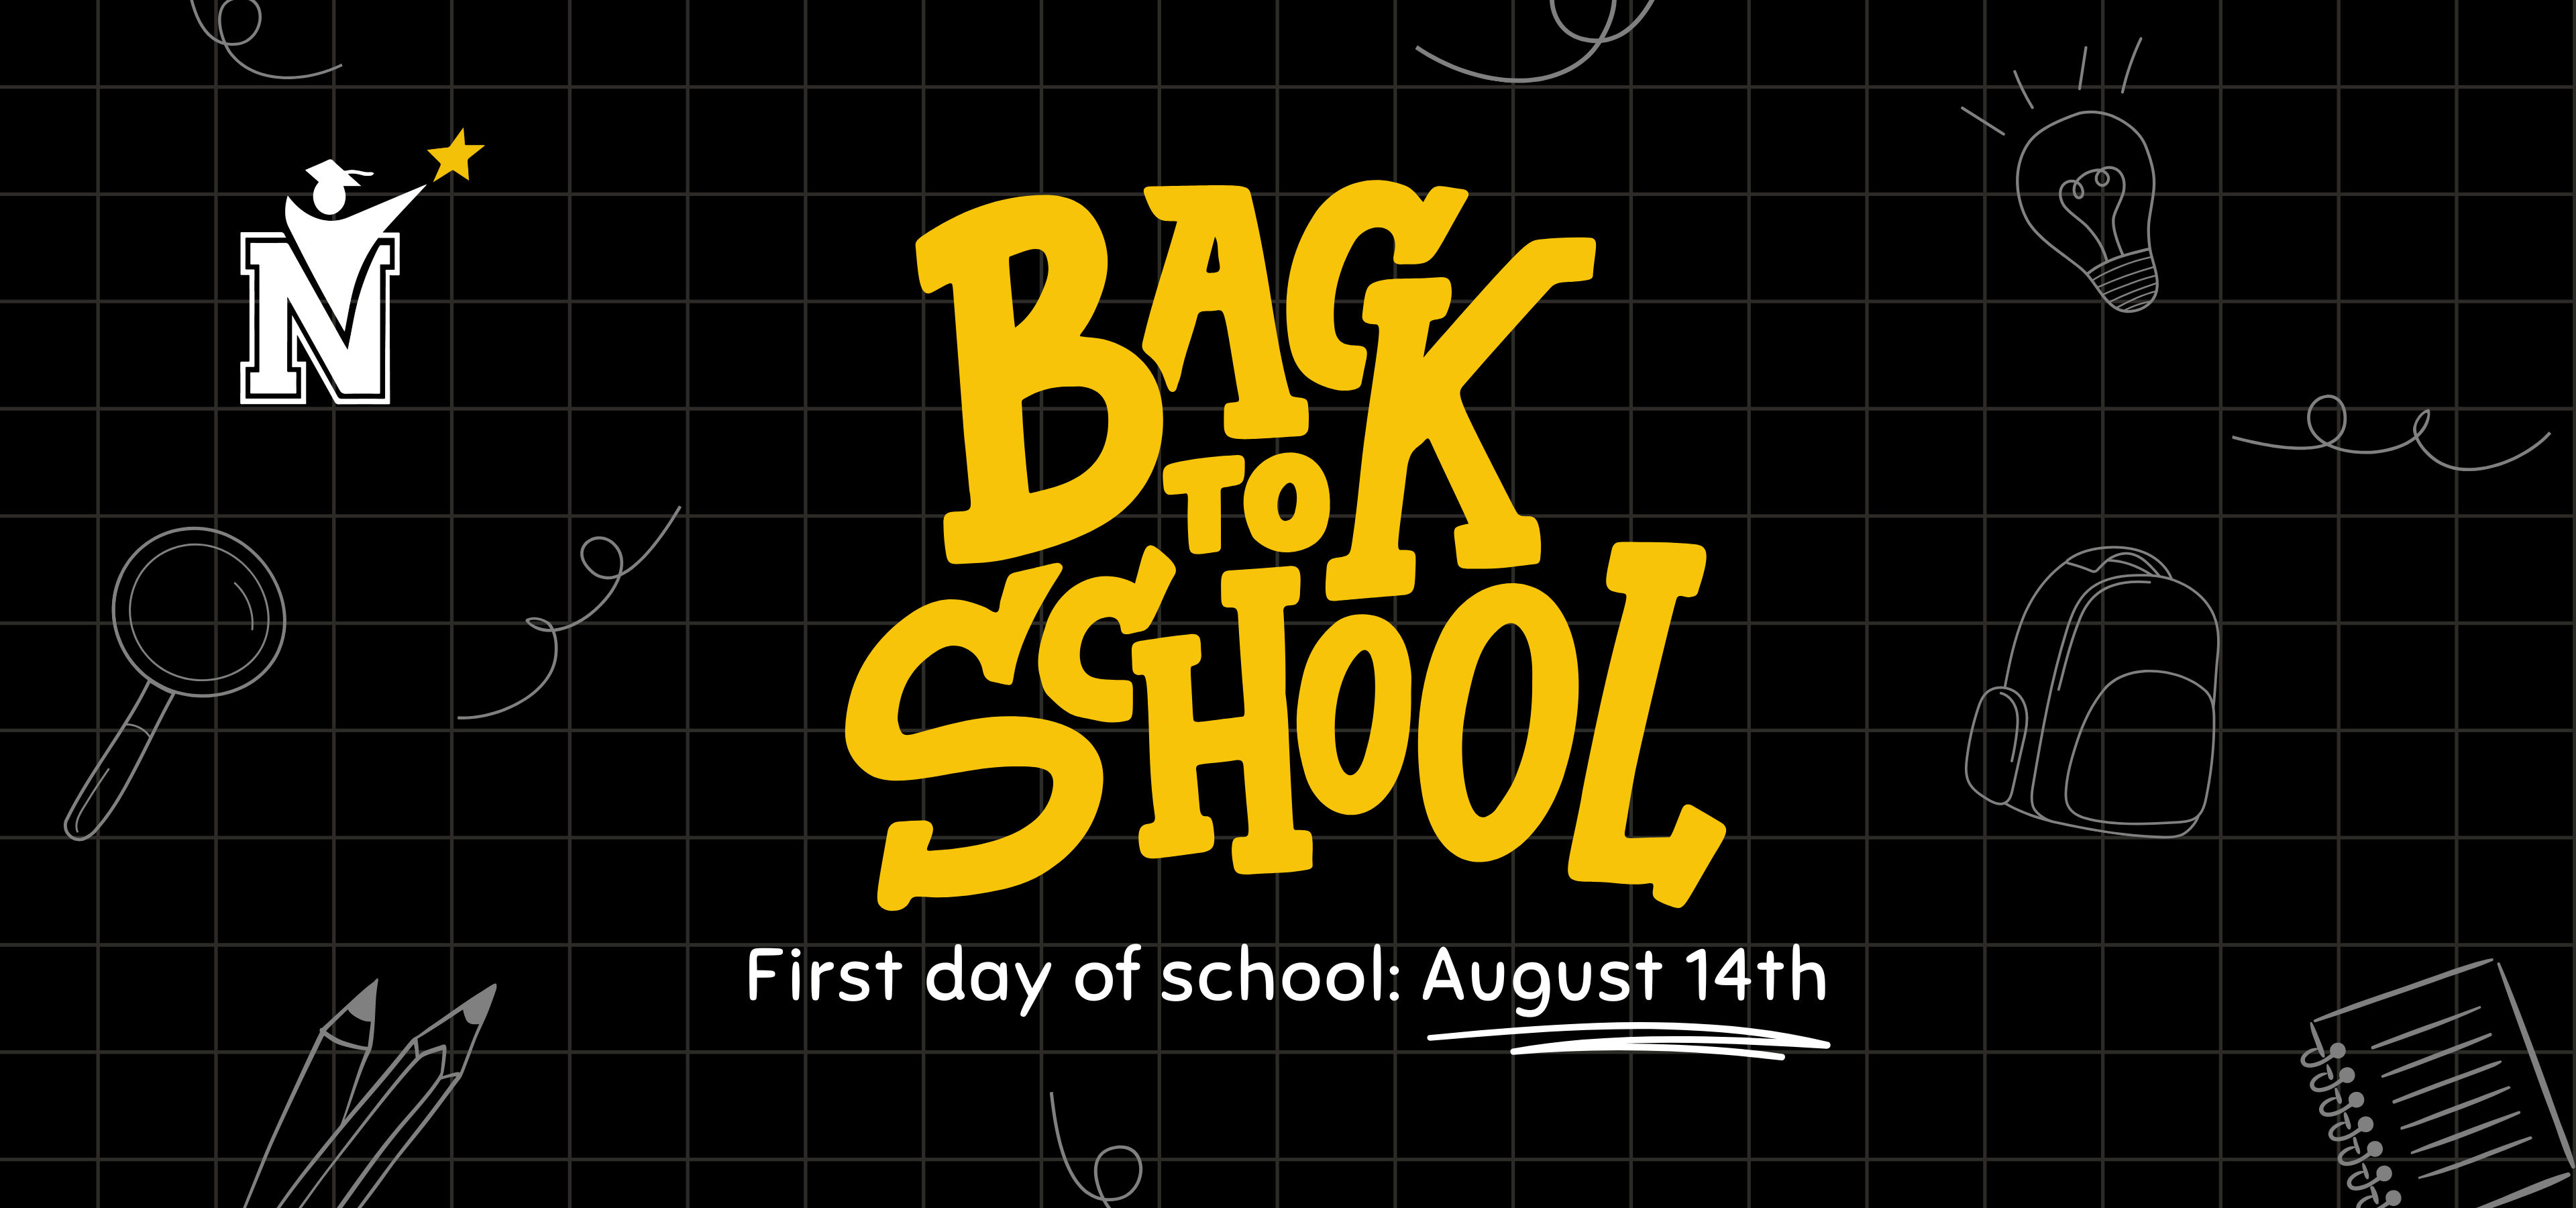 Back to school. First day of school is August 14th